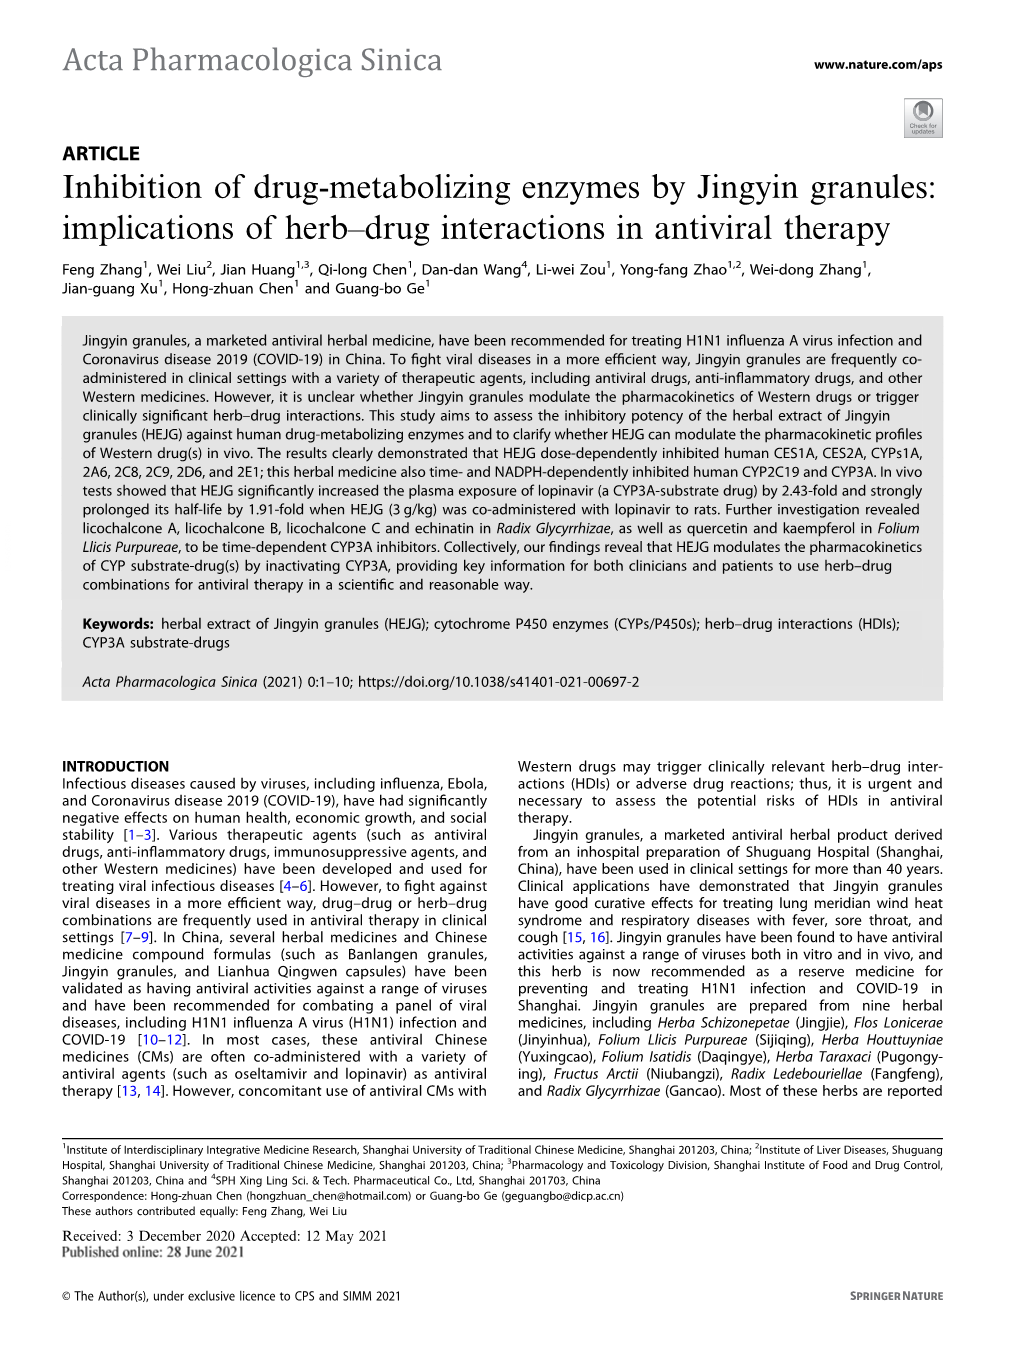 Inhibition of Drug-Metabolizing Enzymes by Jingyin Granules: Implications of Herb–Drug Interactions in Antiviral Therapy